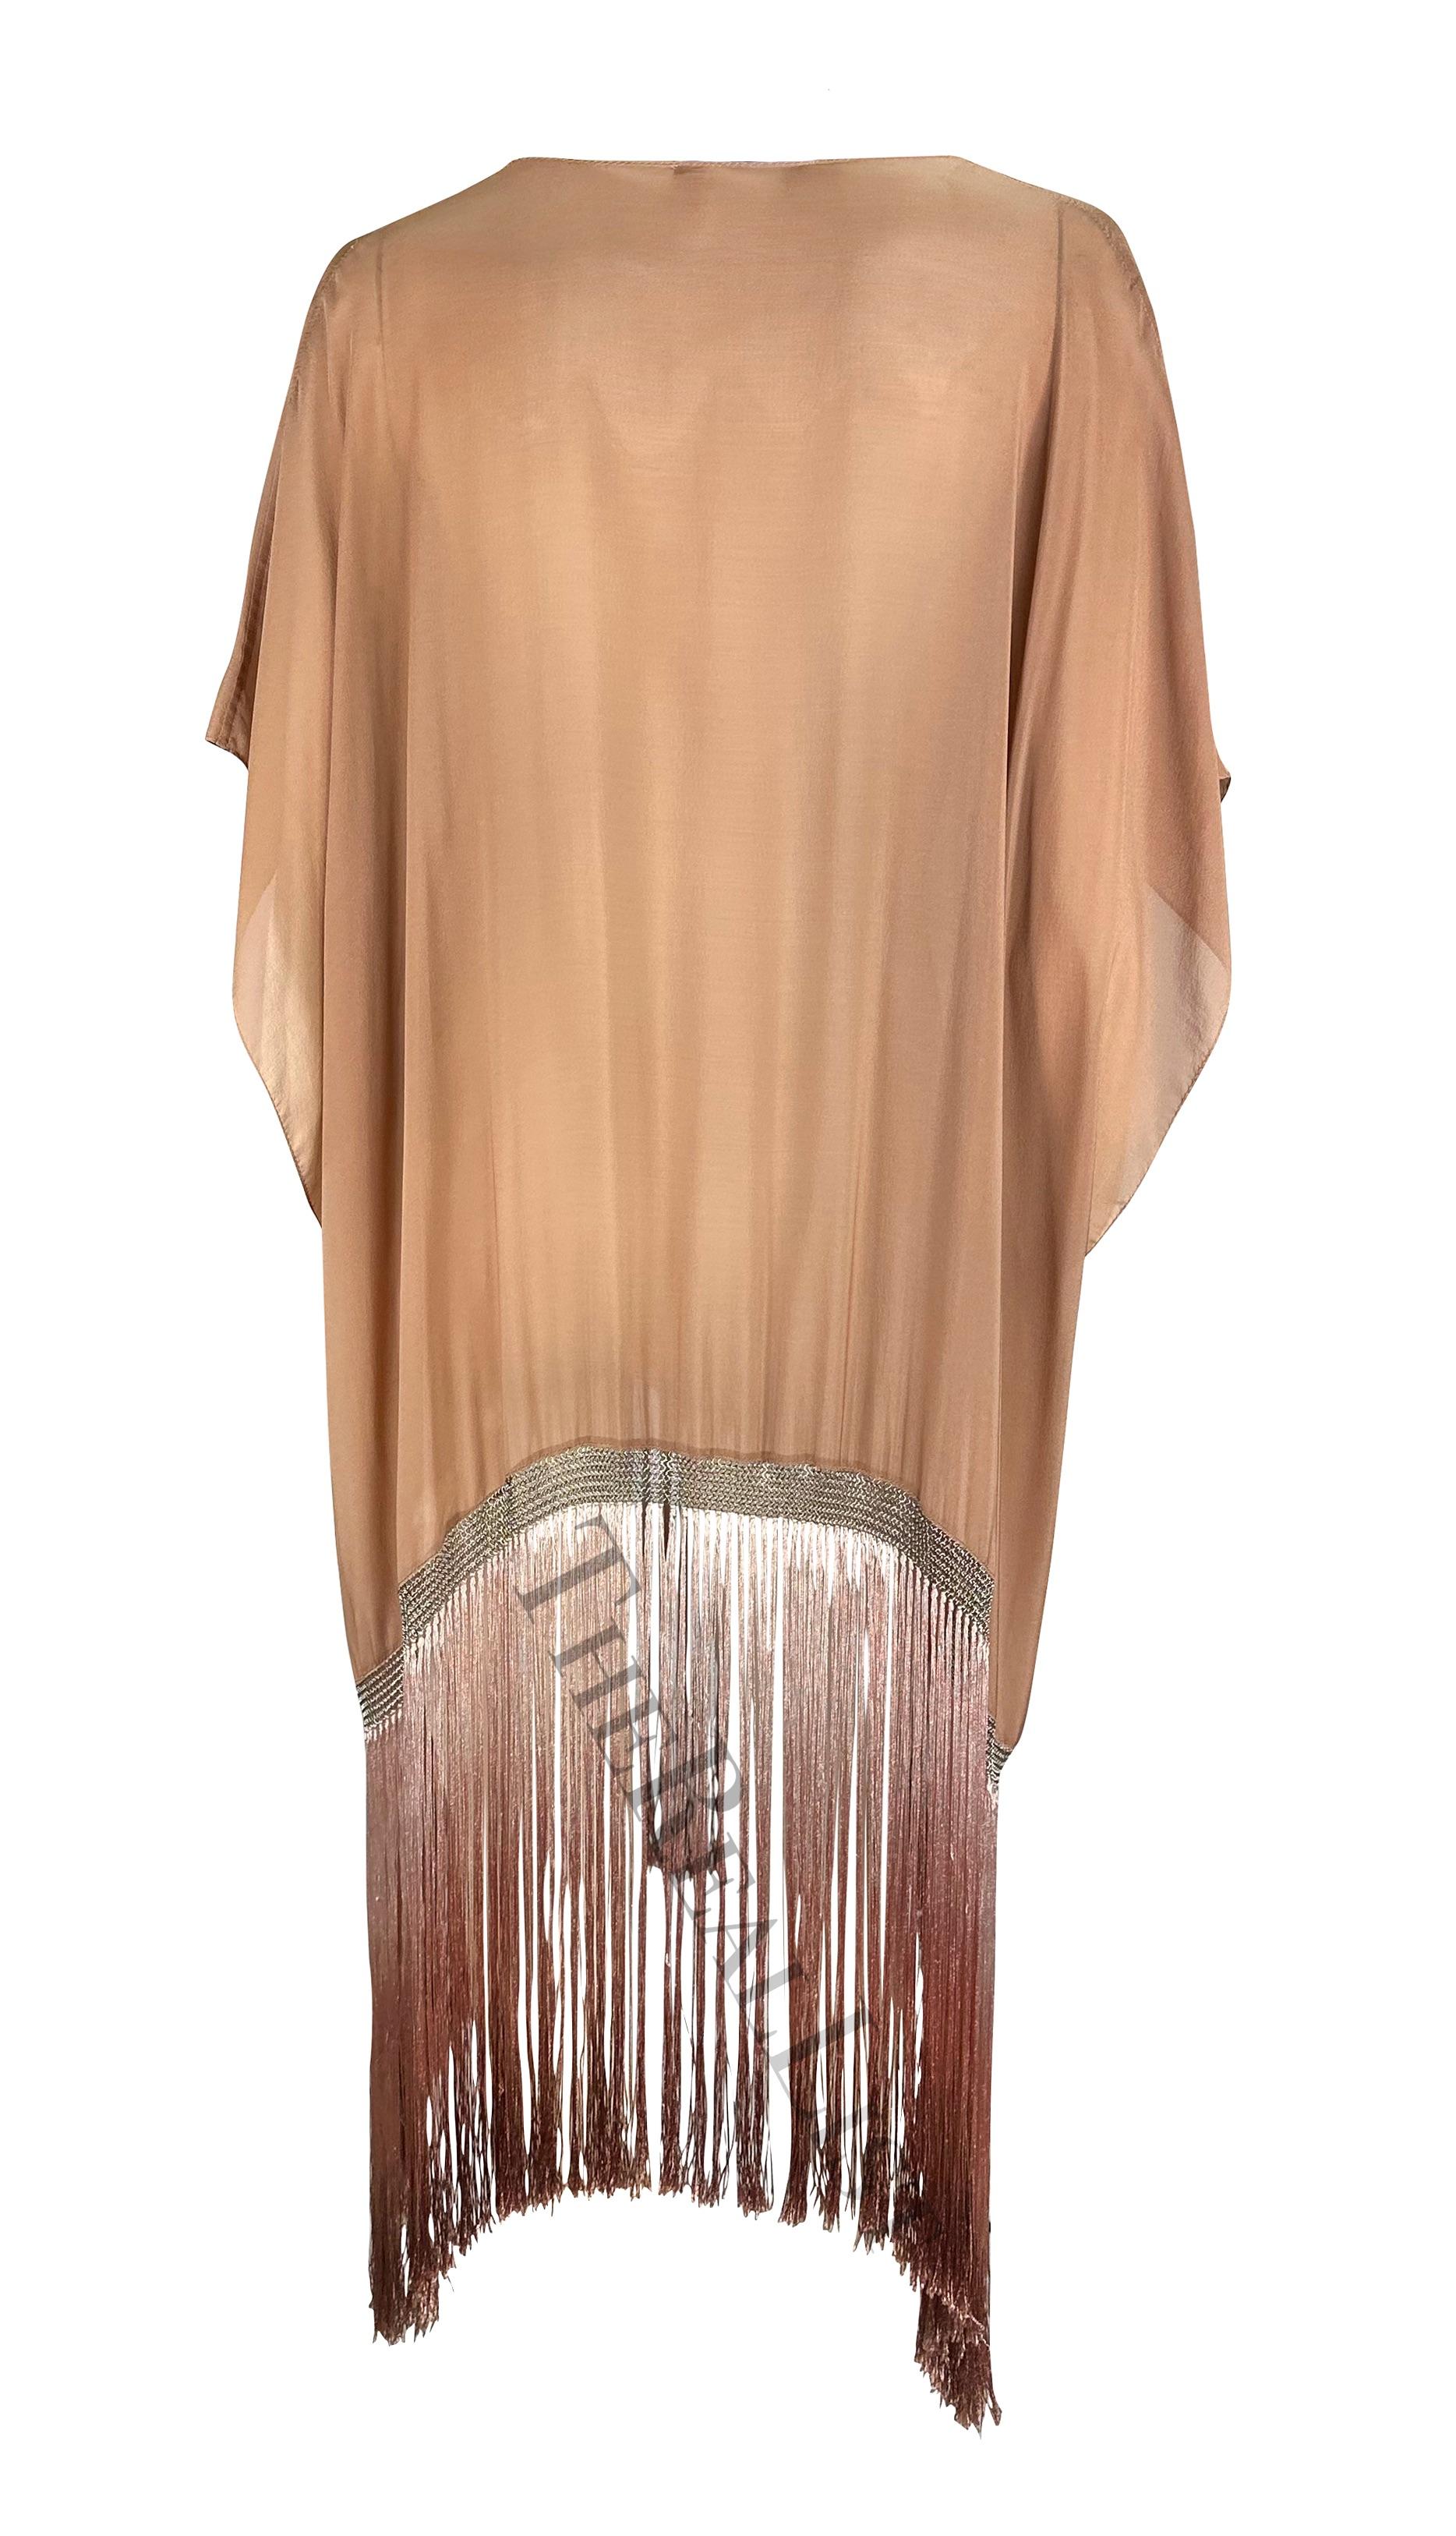 S/S 2004 Gucci by Tom Ford Chain Link Peach Ombré Fringe Kaftan Cover Up  3